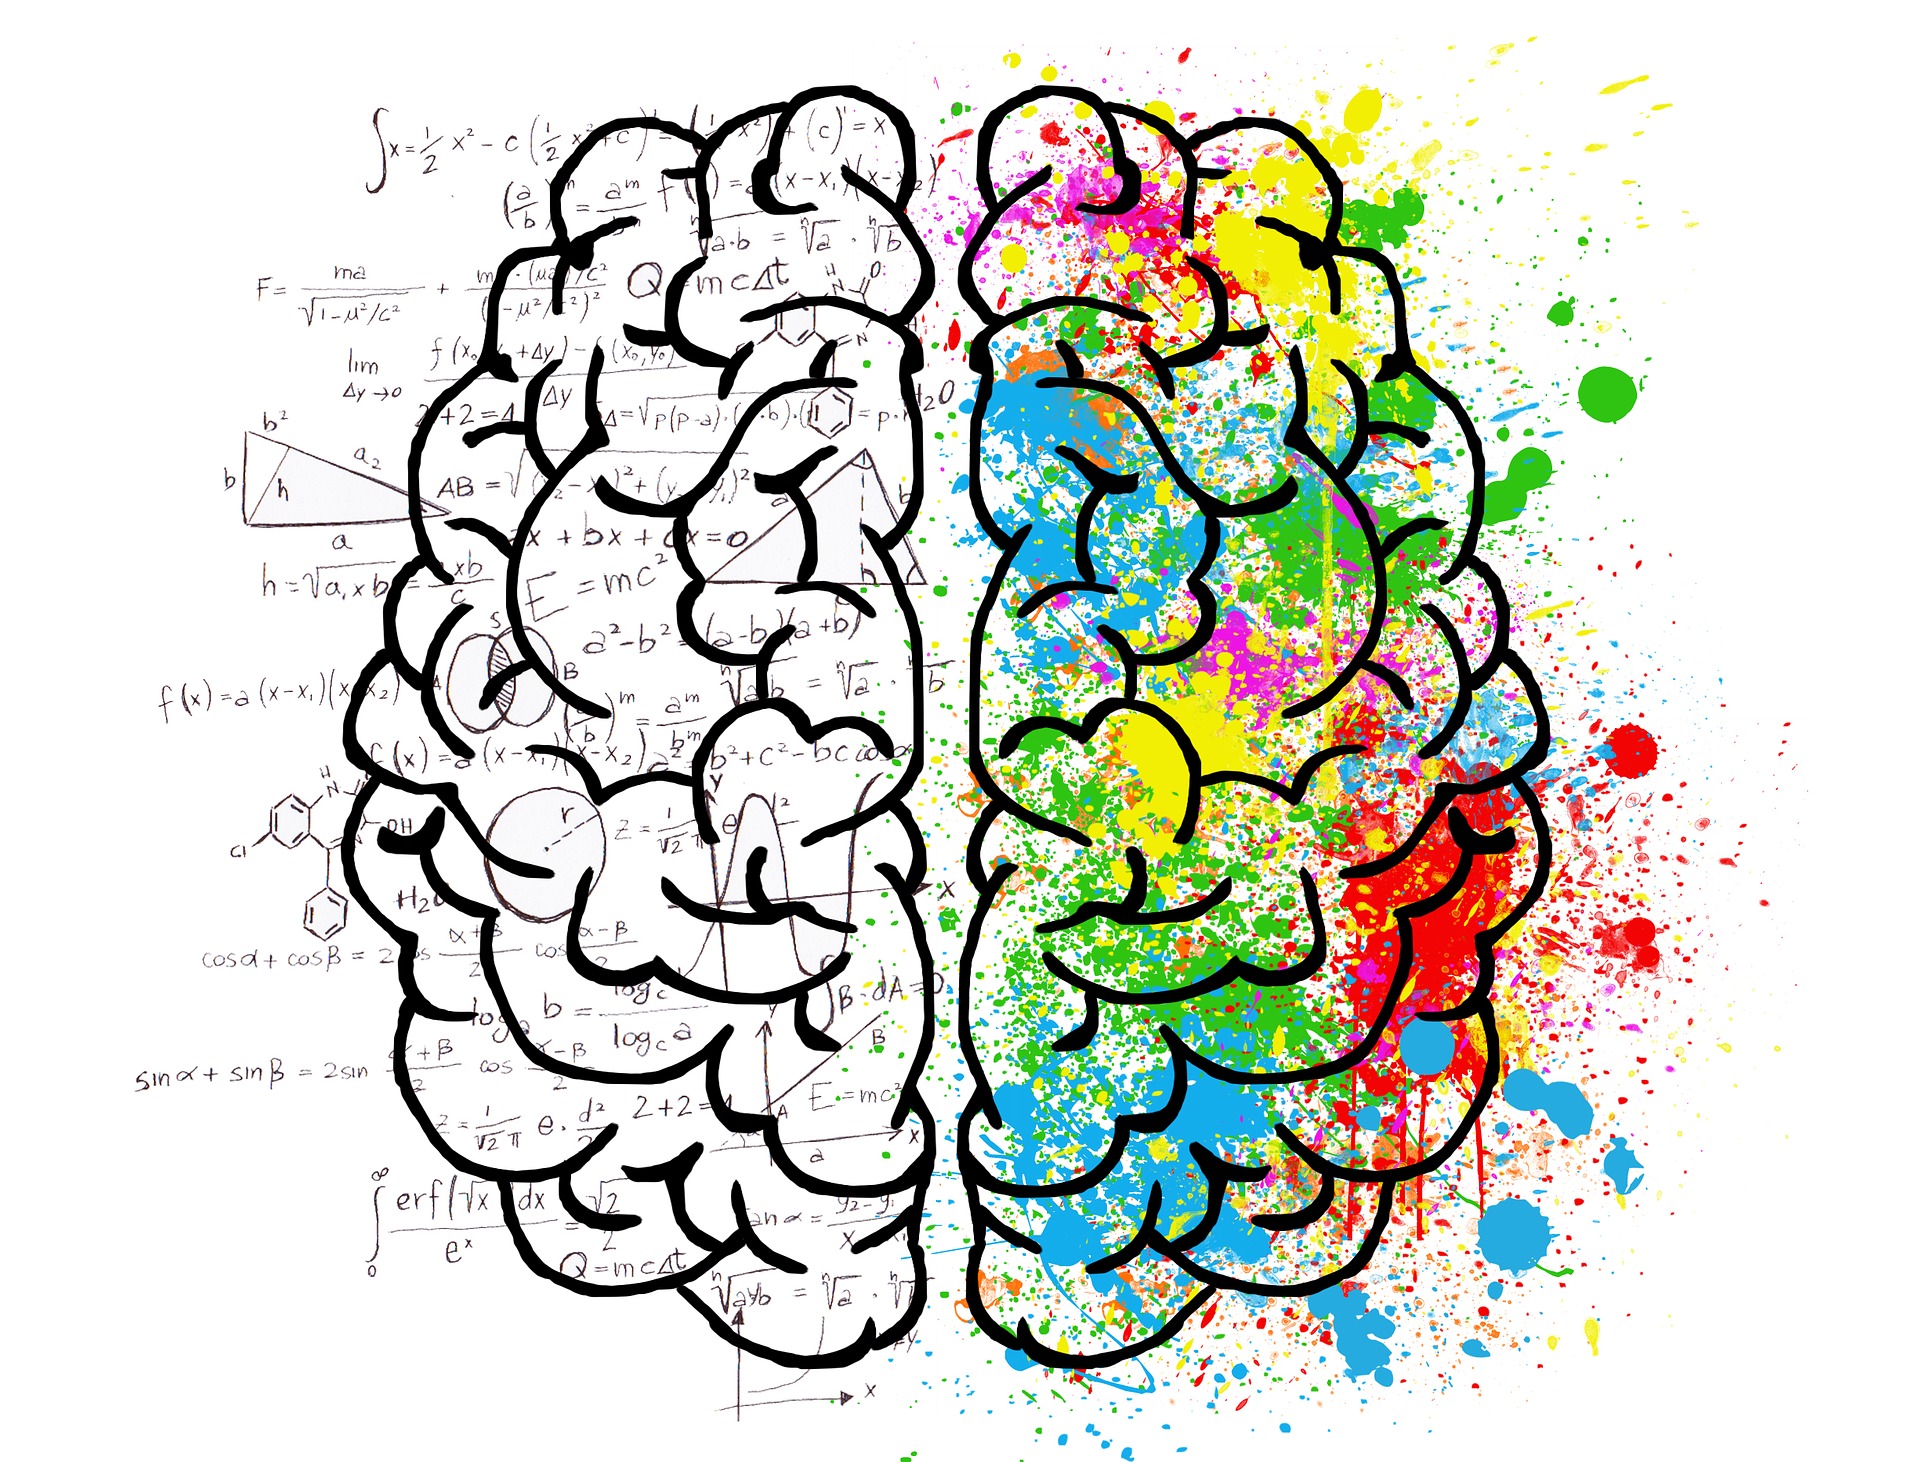 Brain clip art that depicts the left hemisphere with math, engineering and science symbols and the right with bright colors